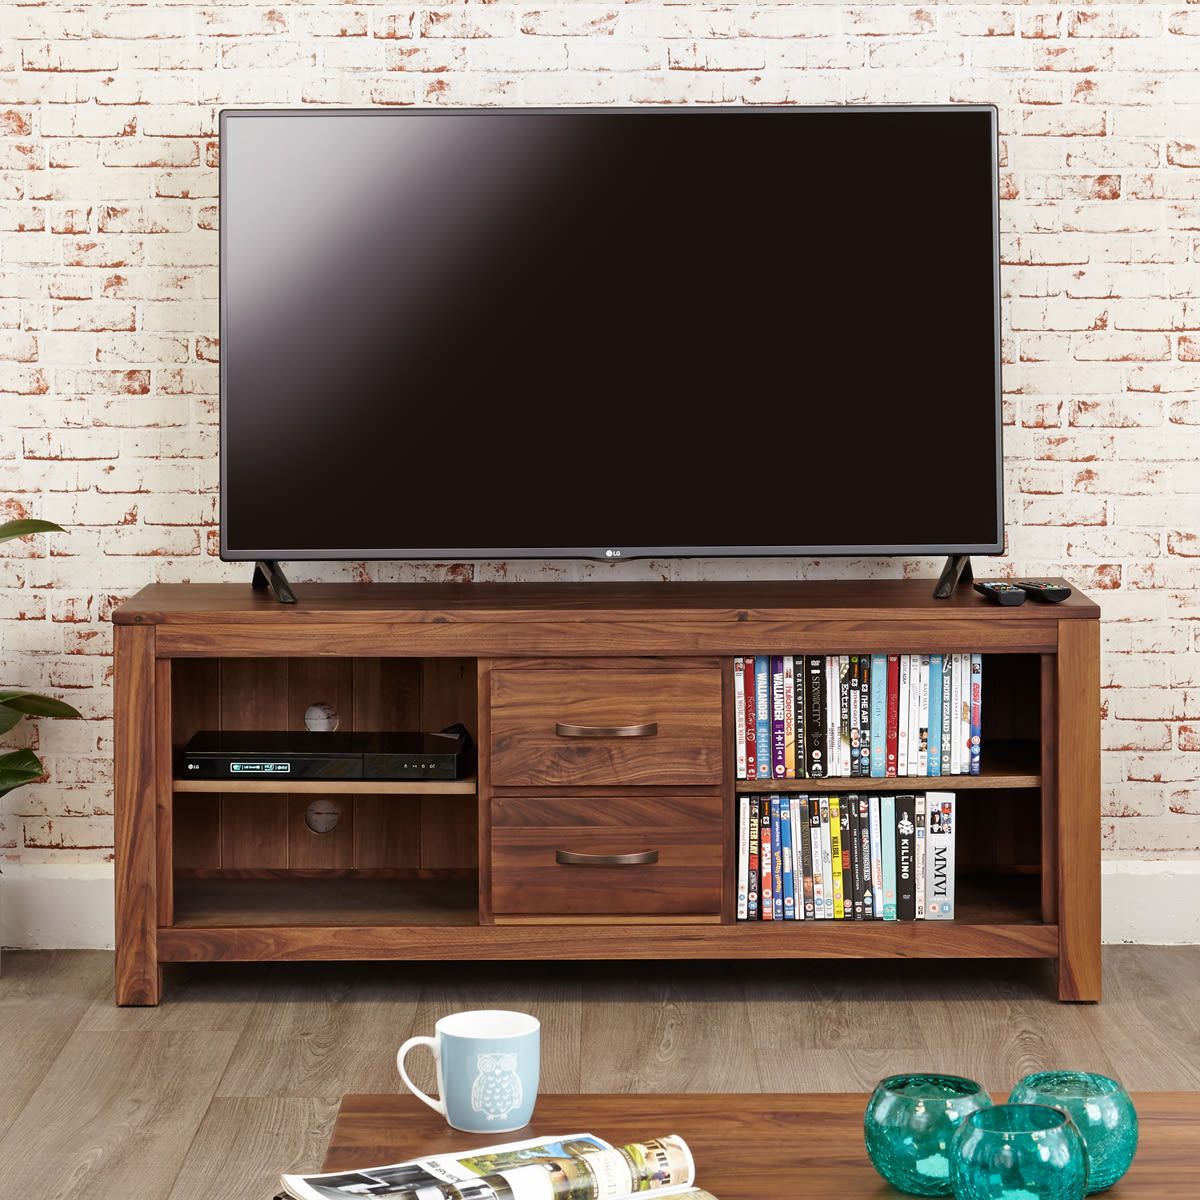 Mayan Walnut Widescreen Television Cabinet – Wooden Inside Widescreen Tv Cabinets (View 5 of 15)